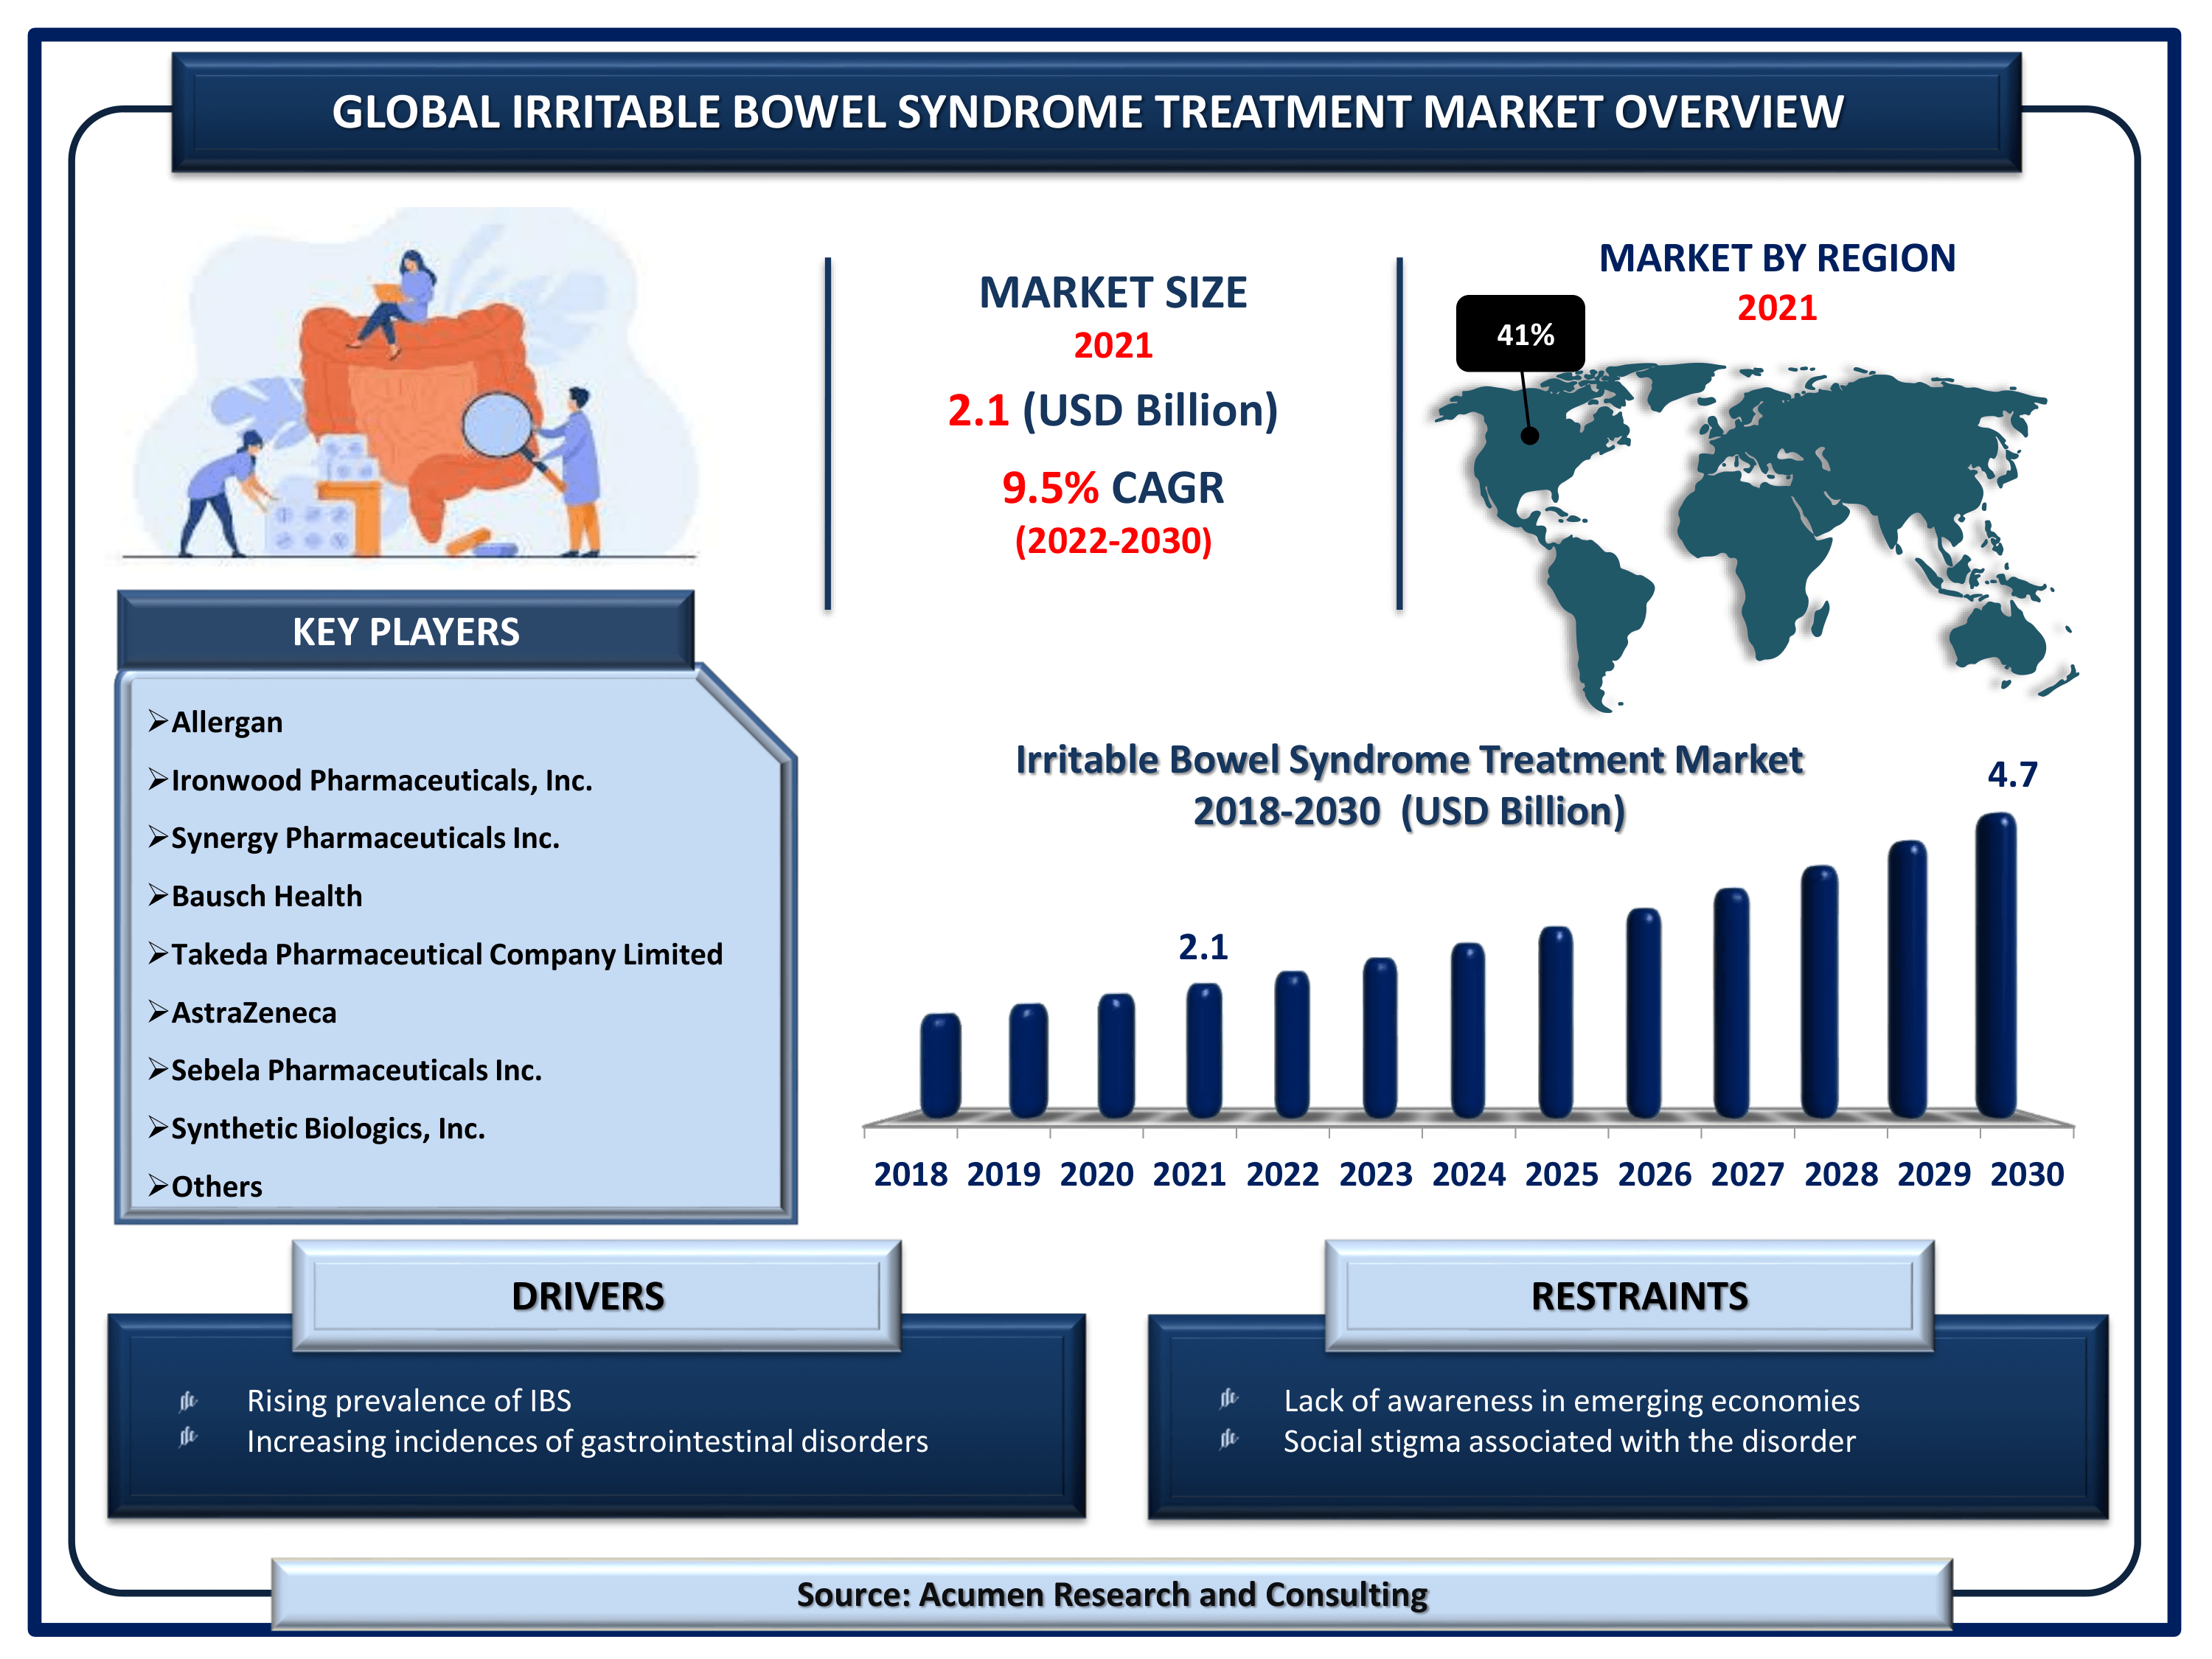 Global irritable bowel syndrome treatment market revenue is estimated to reach USD 4.7 Billion by 2030 with a CAGR of 9.5% from 2022 to 2030